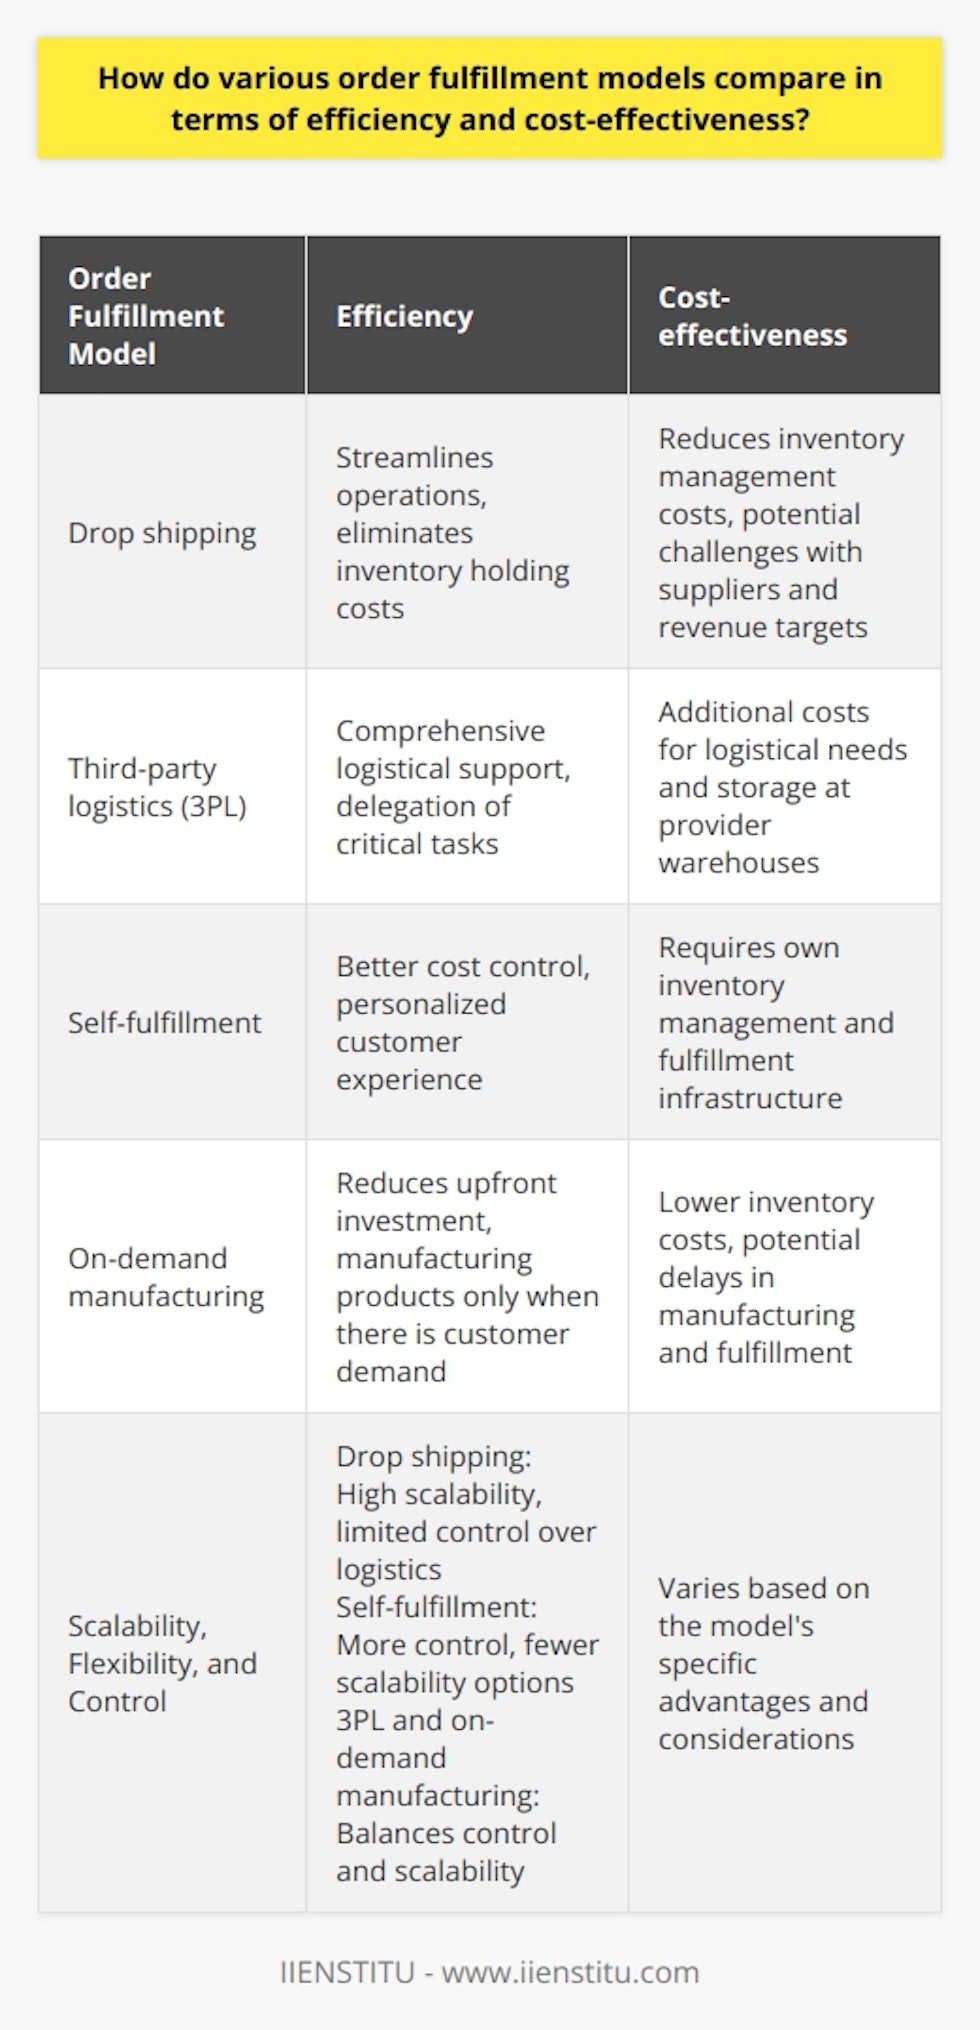 Order fulfillment models play a crucial role in the efficiency and cost-effectiveness of supply chain processes. By comparing different models like drop shipping, third-party logistics (3PL), self-fulfillment, and on-demand manufacturing, businesses can make informed decisions to optimize their order fulfillment strategies.Efficiency in order fulfillment is greatly influenced by how resources and time are managed, as well as the decision-making processes involved. Drop shipping is particularly beneficial for online businesses as it eliminates the need for inventory holding costs and streamlines operations. On the other hand, 3PL provides comprehensive logistical support, allowing businesses to delegate critical tasks and focus on core functions.When it comes to cost-effectiveness, each model has its own advantages and considerations. Drop shipping reduces inventory management costs, but businesses may face unexpected challenges if suppliers don't offer competitive pricing or revenue targets aren't met. The 3PL model incurs additional costs due to logistical needs and storage at provider warehouses. Self-fulfillment allows businesses to have better cost control while offering a personalized customer experience. On-demand manufacturing requires less upfront investment and reduces inventory costs by manufacturing products only when there is demand from customers.To determine the most suitable order fulfillment model in terms of efficiency and cost-effectiveness, businesses should consider factors such as scalability, flexibility, and control over logistics. Drop shipping offers high scalability but limited control over logistics, while self-fulfillment provides more control but fewer scalability options. 3PL and on-demand manufacturing strike a balance between control and scalability to meet varying business needs.In conclusion, businesses should analyze their requirements, target markets, and long-term objectives to choose the most appropriate order fulfillment strategy. By considering critical factors influencing efficiency and cost-effectiveness, organizations can make informed decisions and maximize profits. Balancing scalability, flexibility, and control ensures that businesses can adapt to changing demands while effectively managing and fulfilling orders.